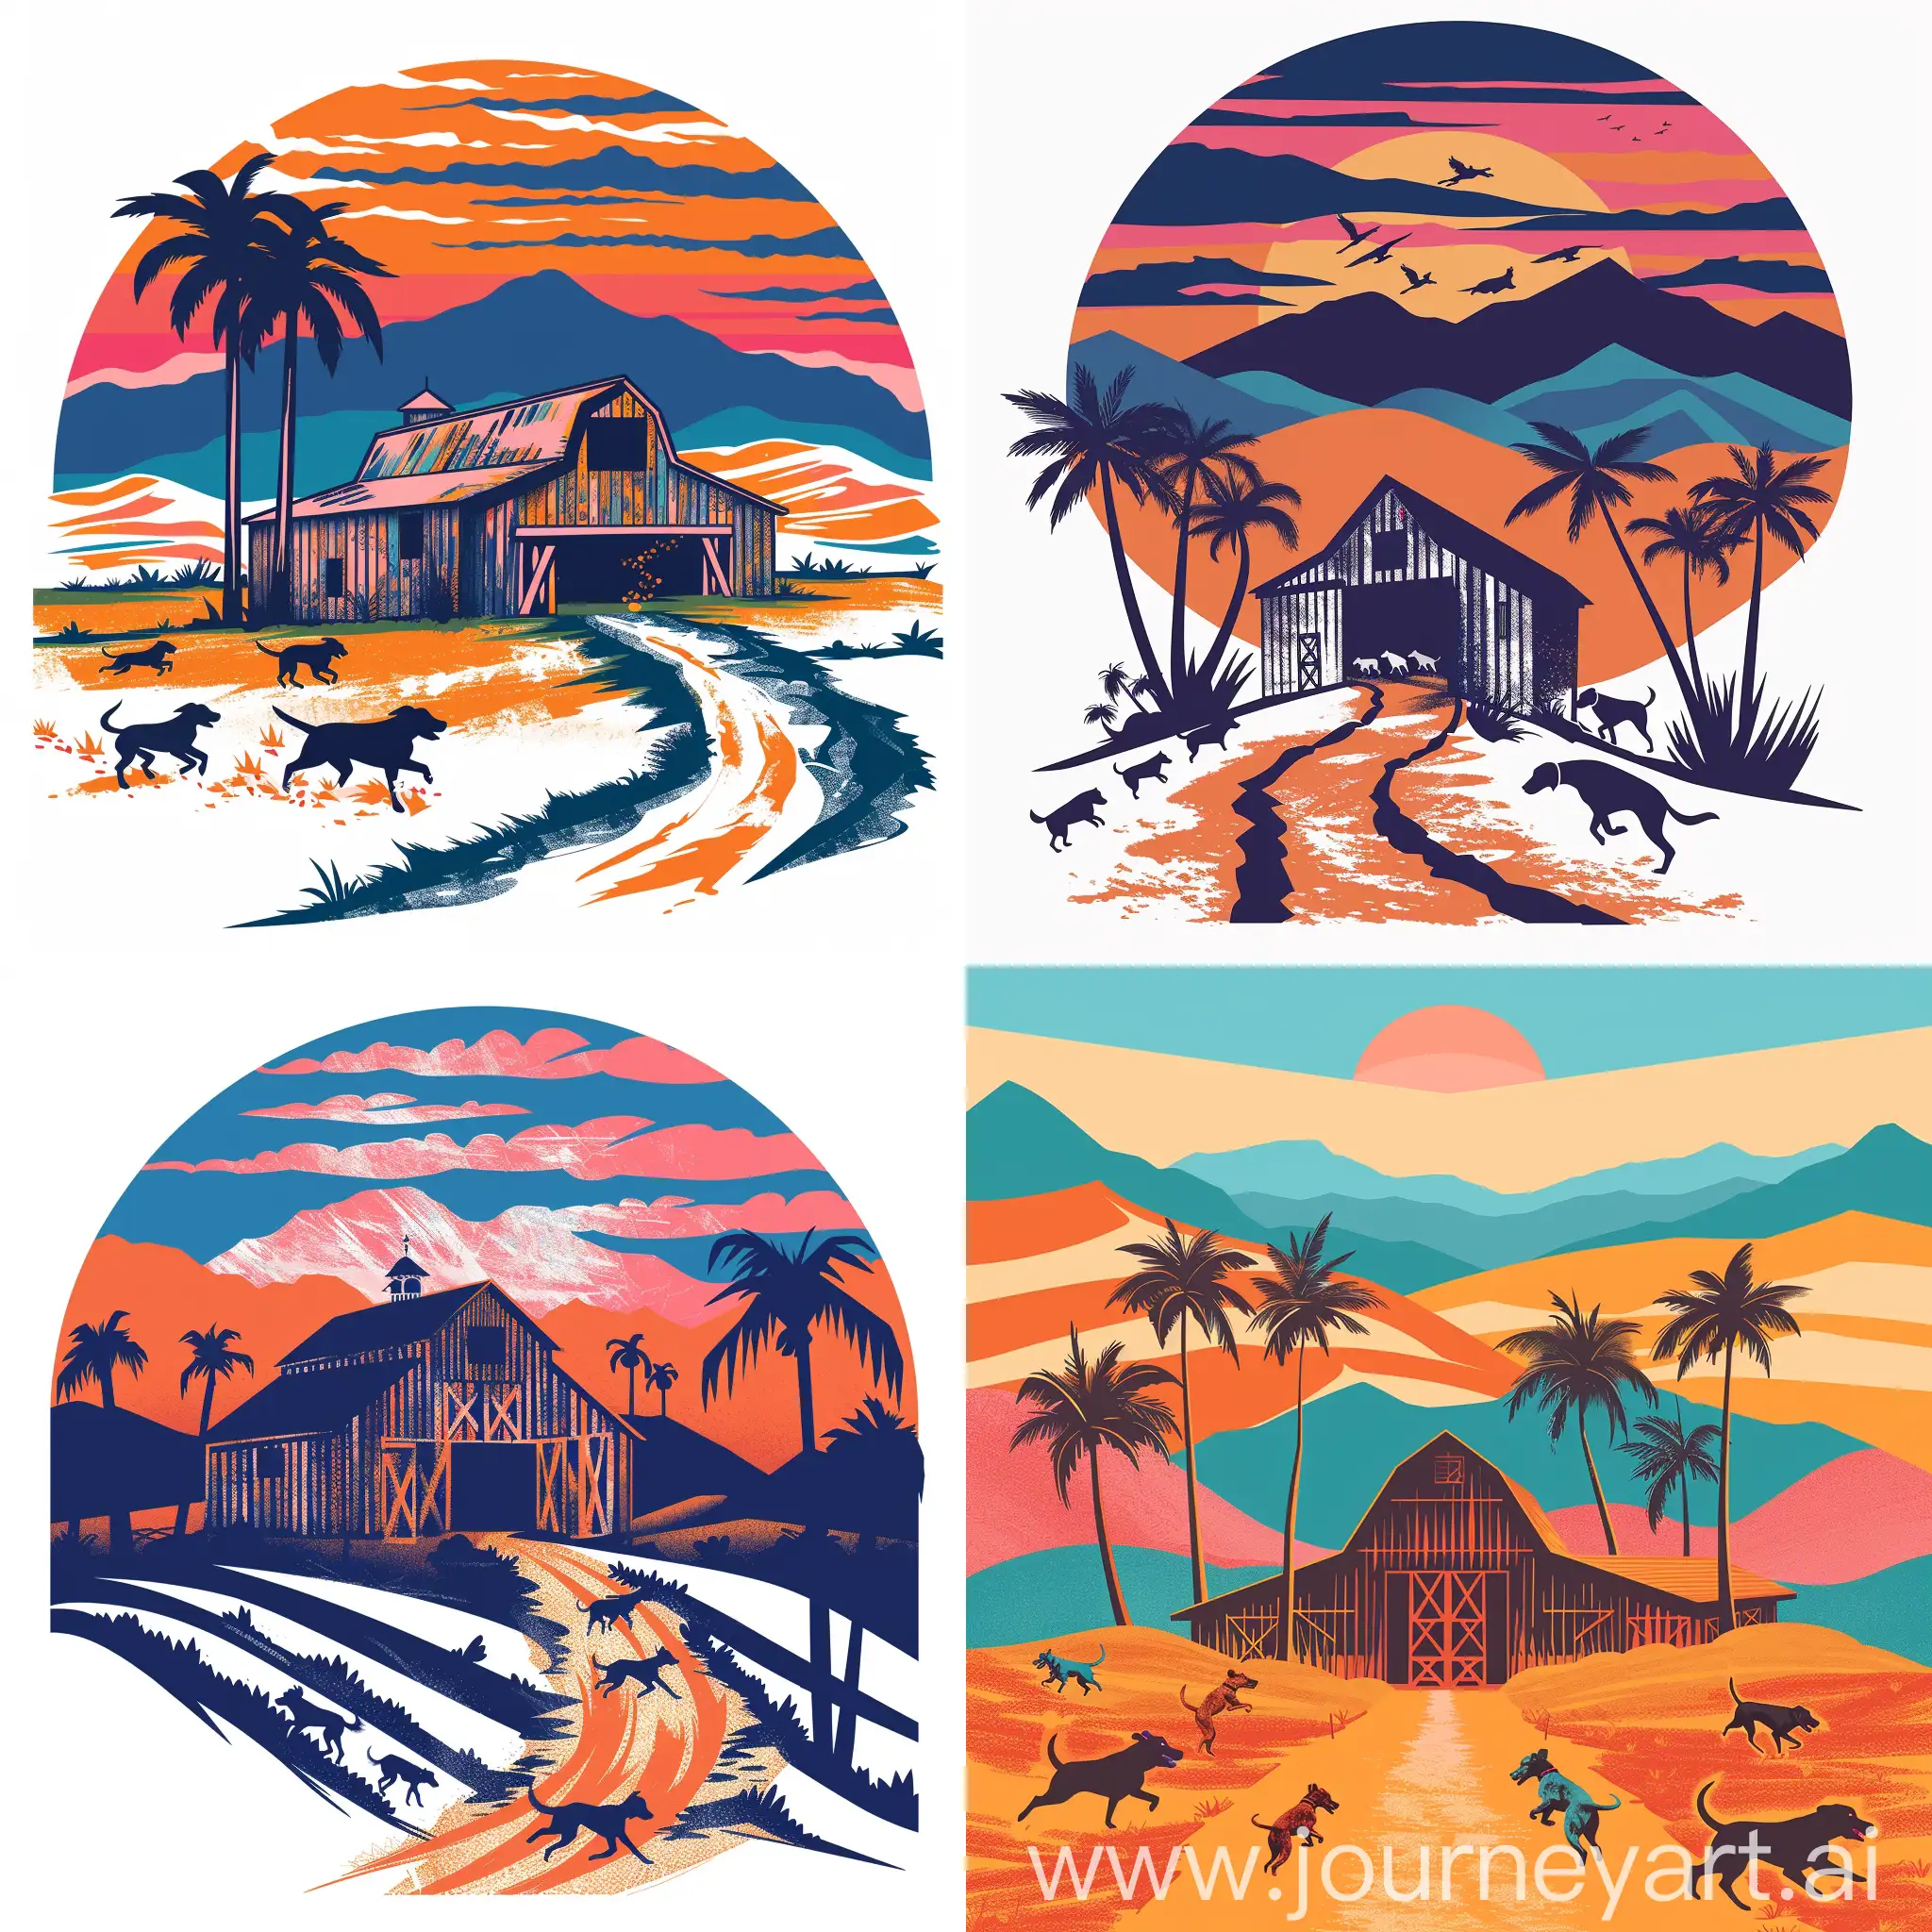 A logo design with Vibrant Oranges, blues and pinks. Like a Florida sunset in the sky. a rustic barn with dogs running free in open land some palm trees and make the mountains dunes, all rolling dunes with palm trees,  Keep the foreground flat and thr dirt road coming out of the barn. Just put the dunes in the background like the mountains dunes and more dogs